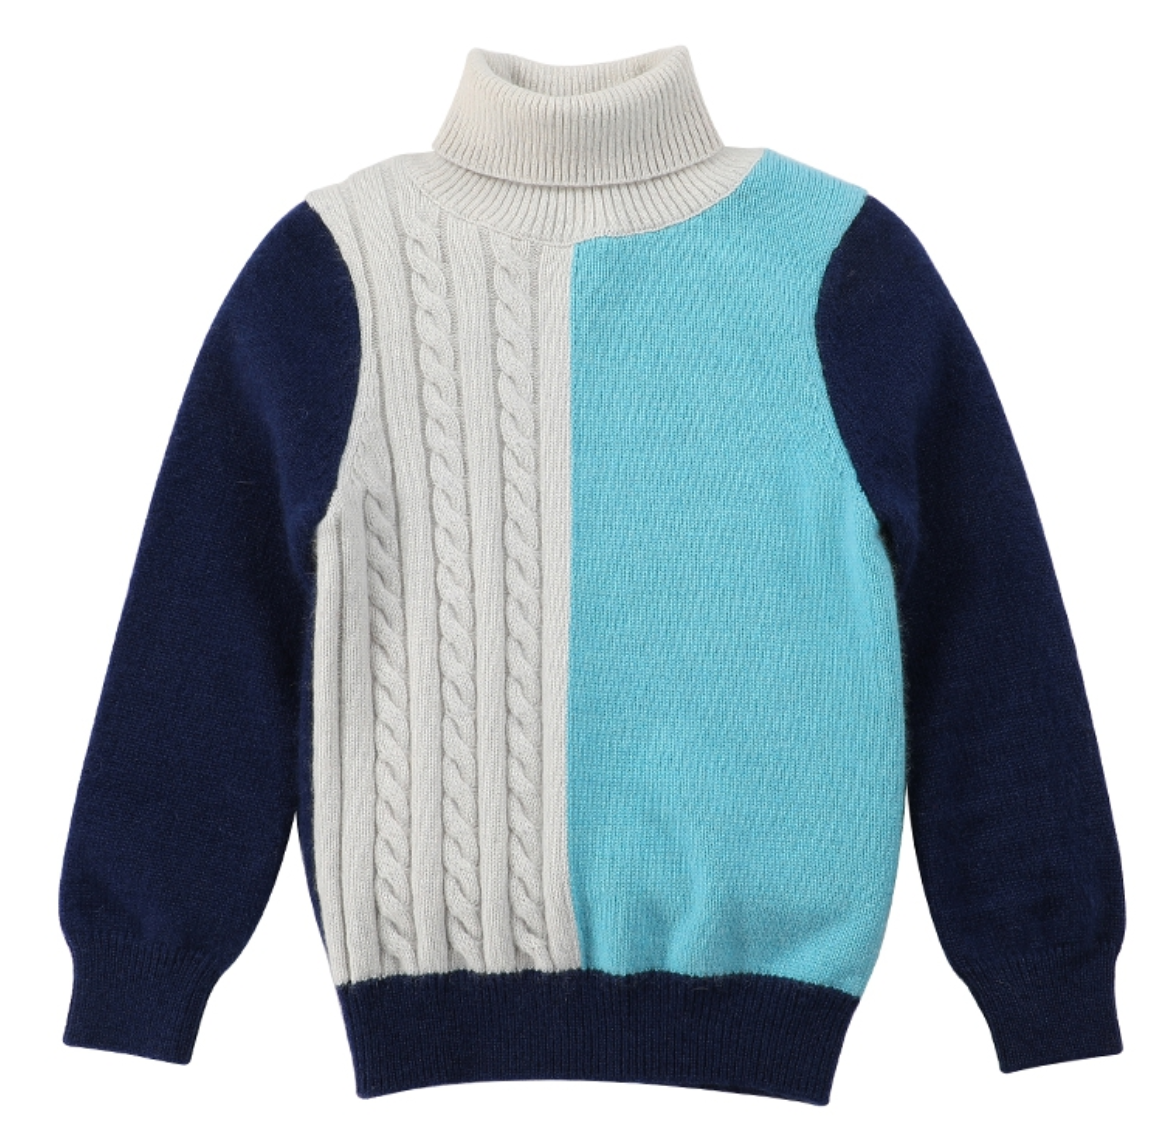 boy cashmere colors pattern sweater with high neck